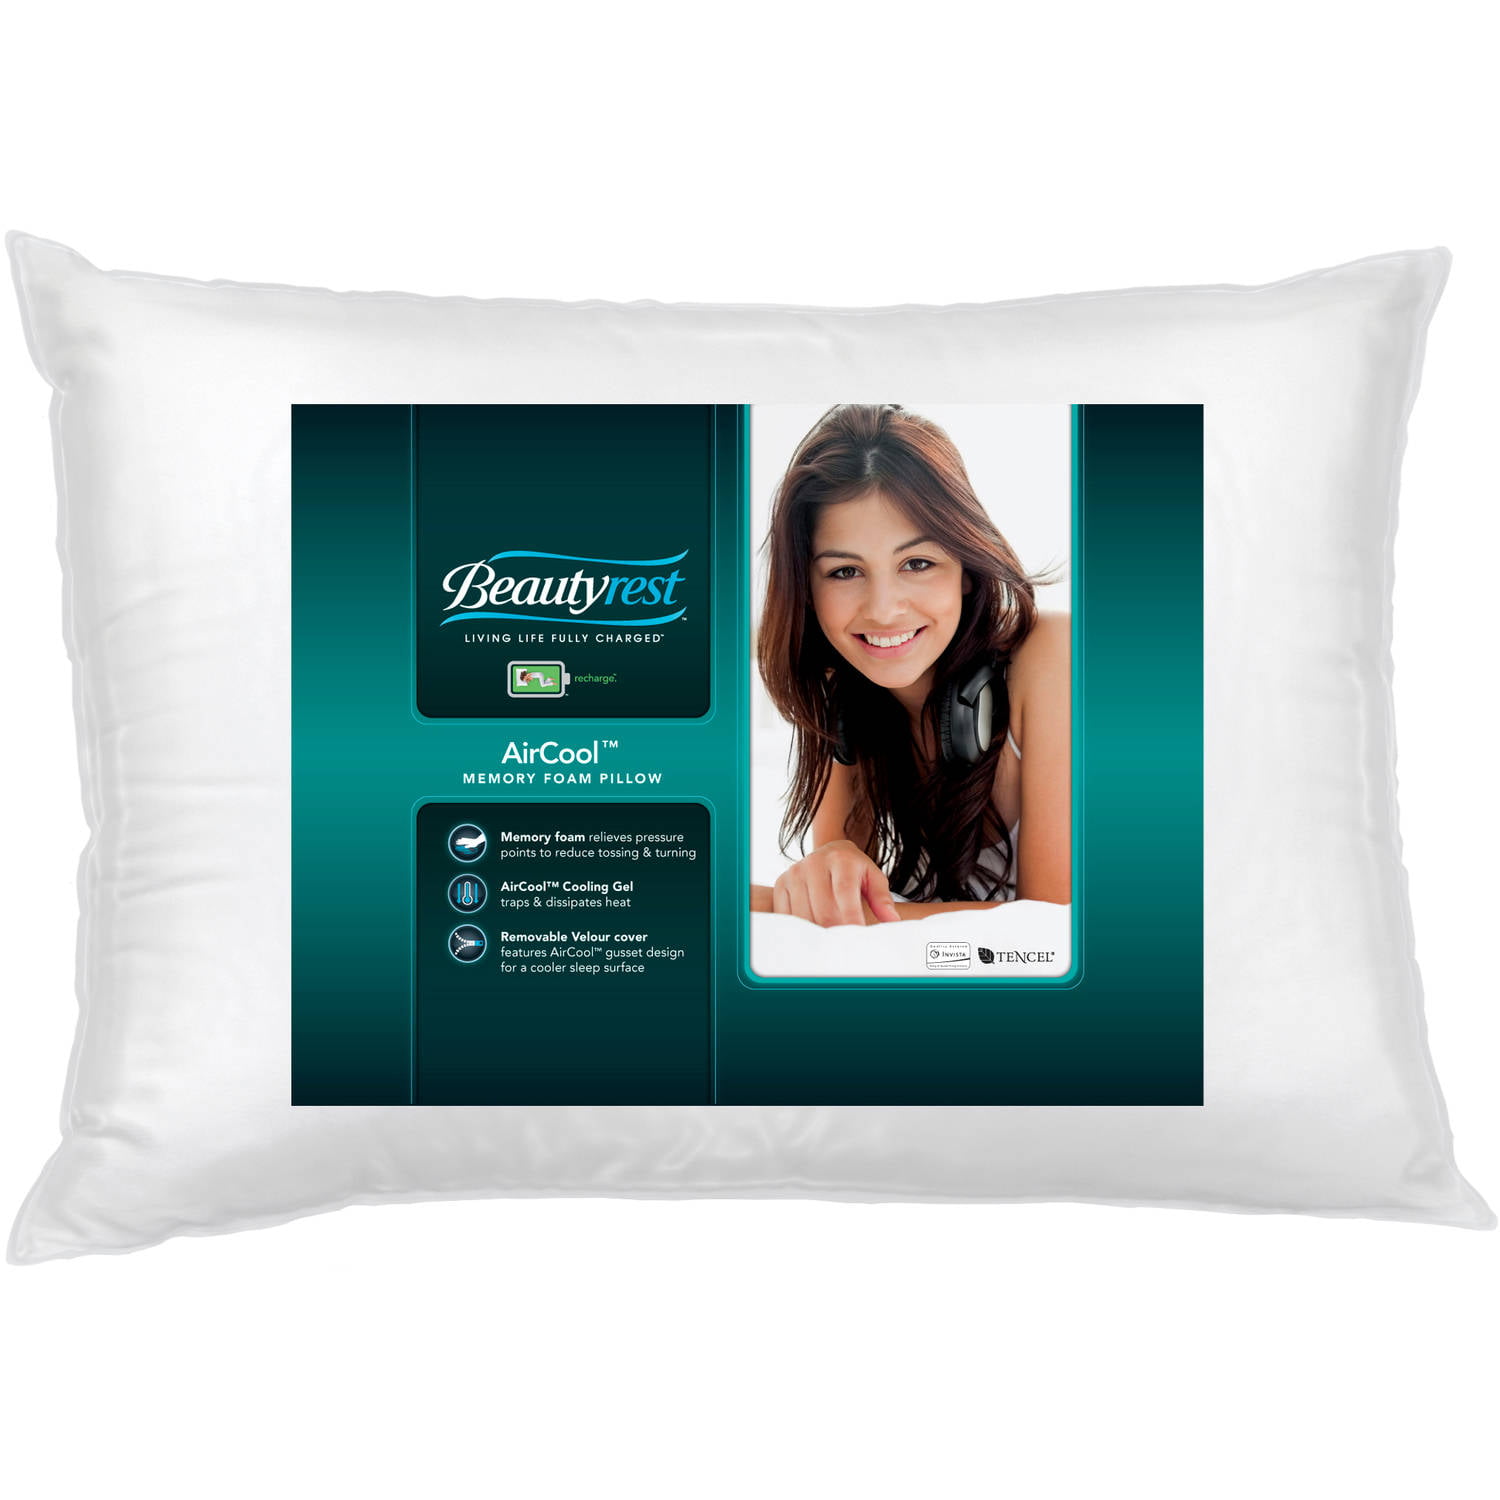 Beautyrest Air Cool Gel Pillow with Removable Cover | eBay